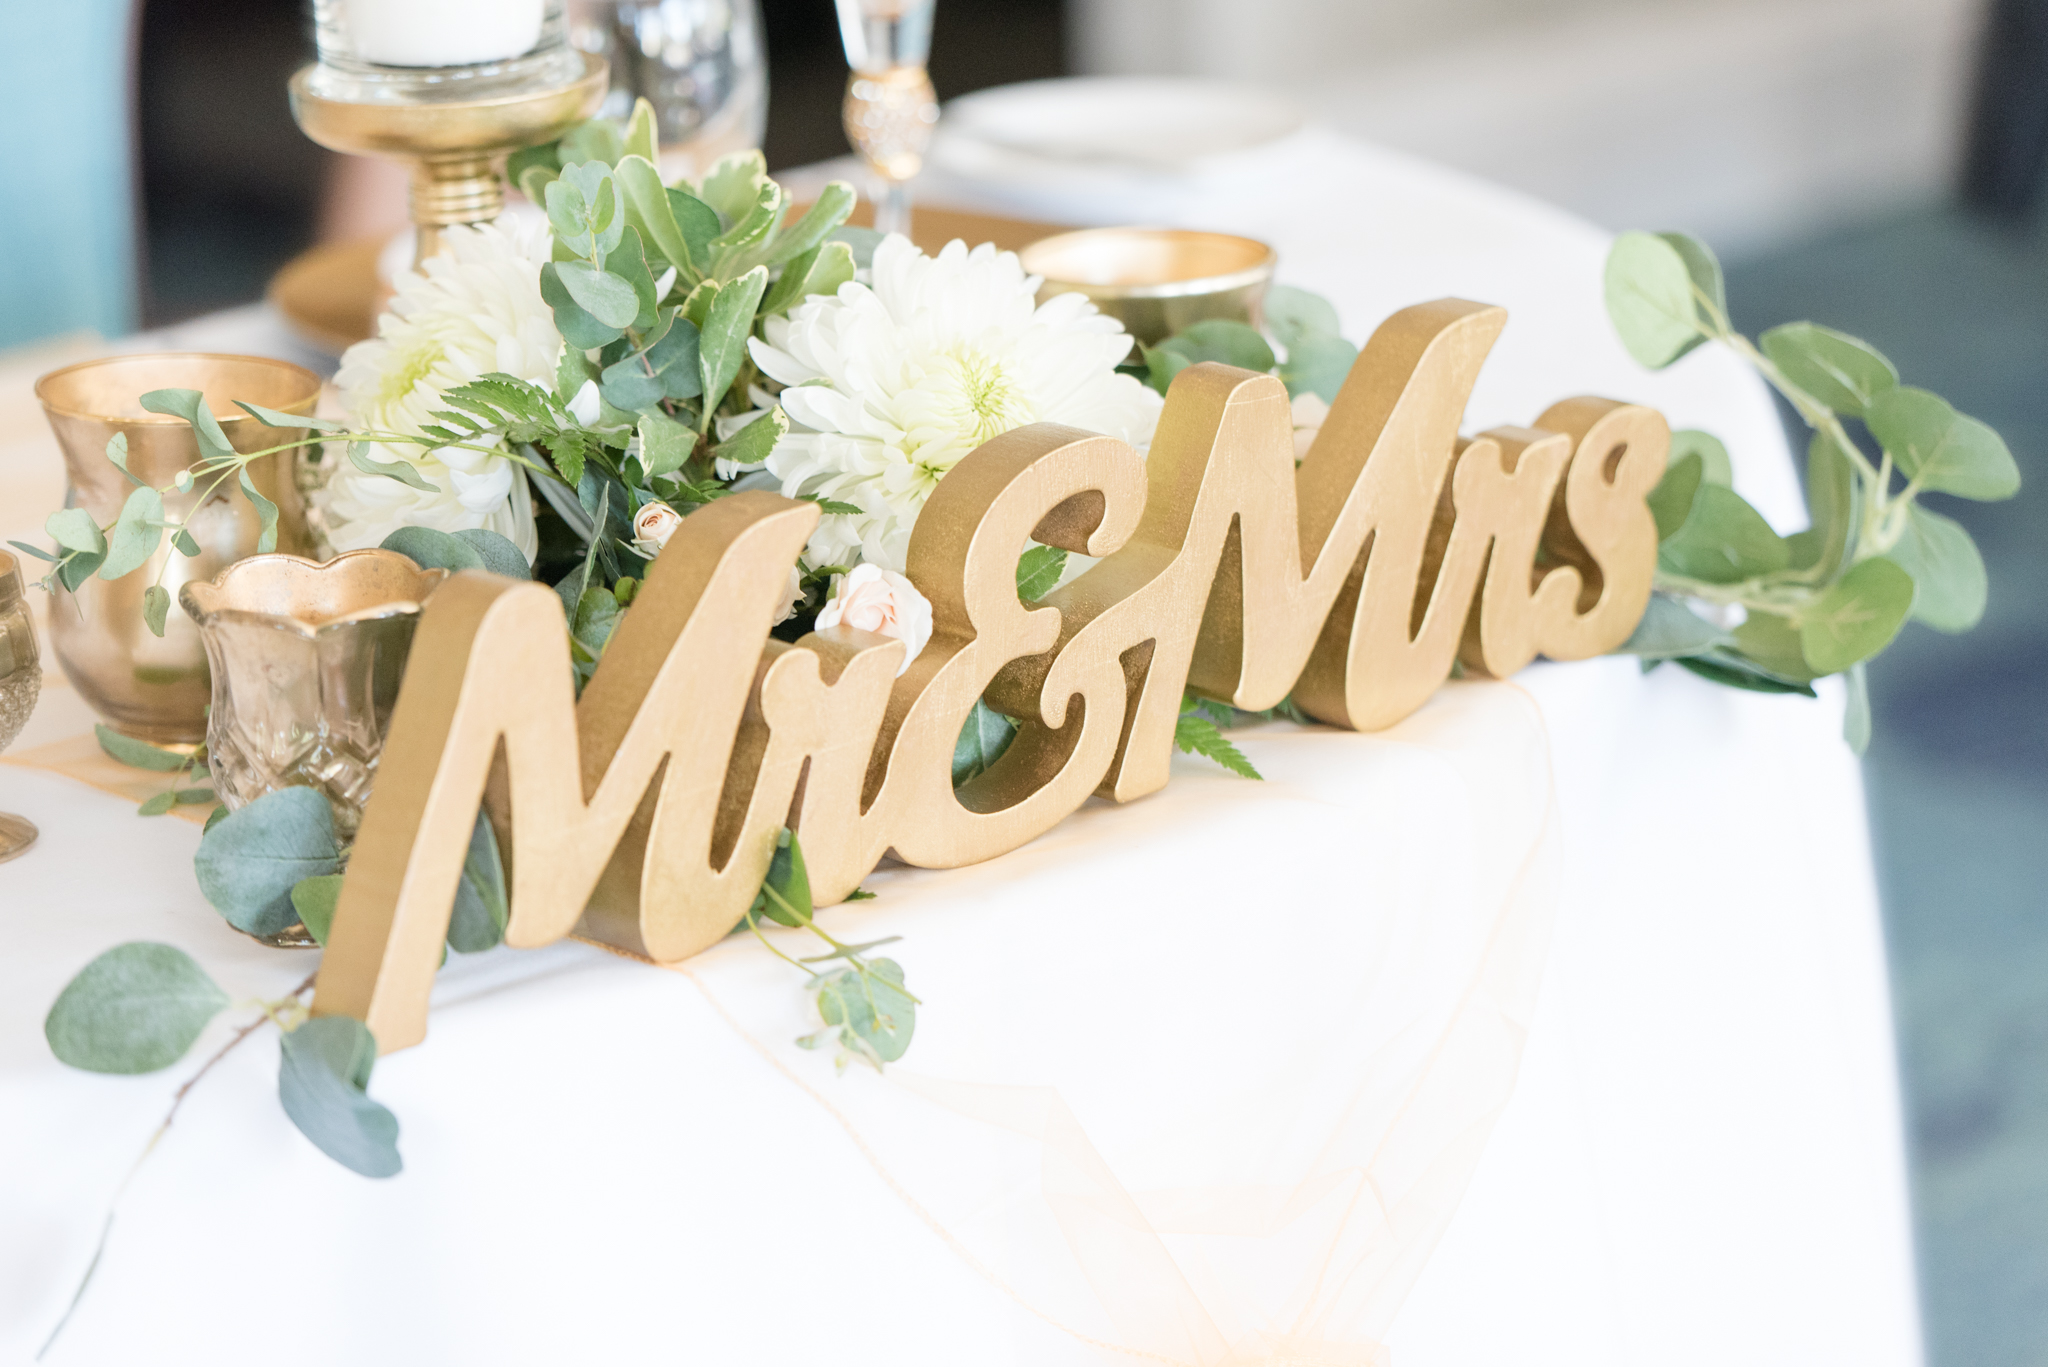 Mr and Mrs sign at wedding reception.